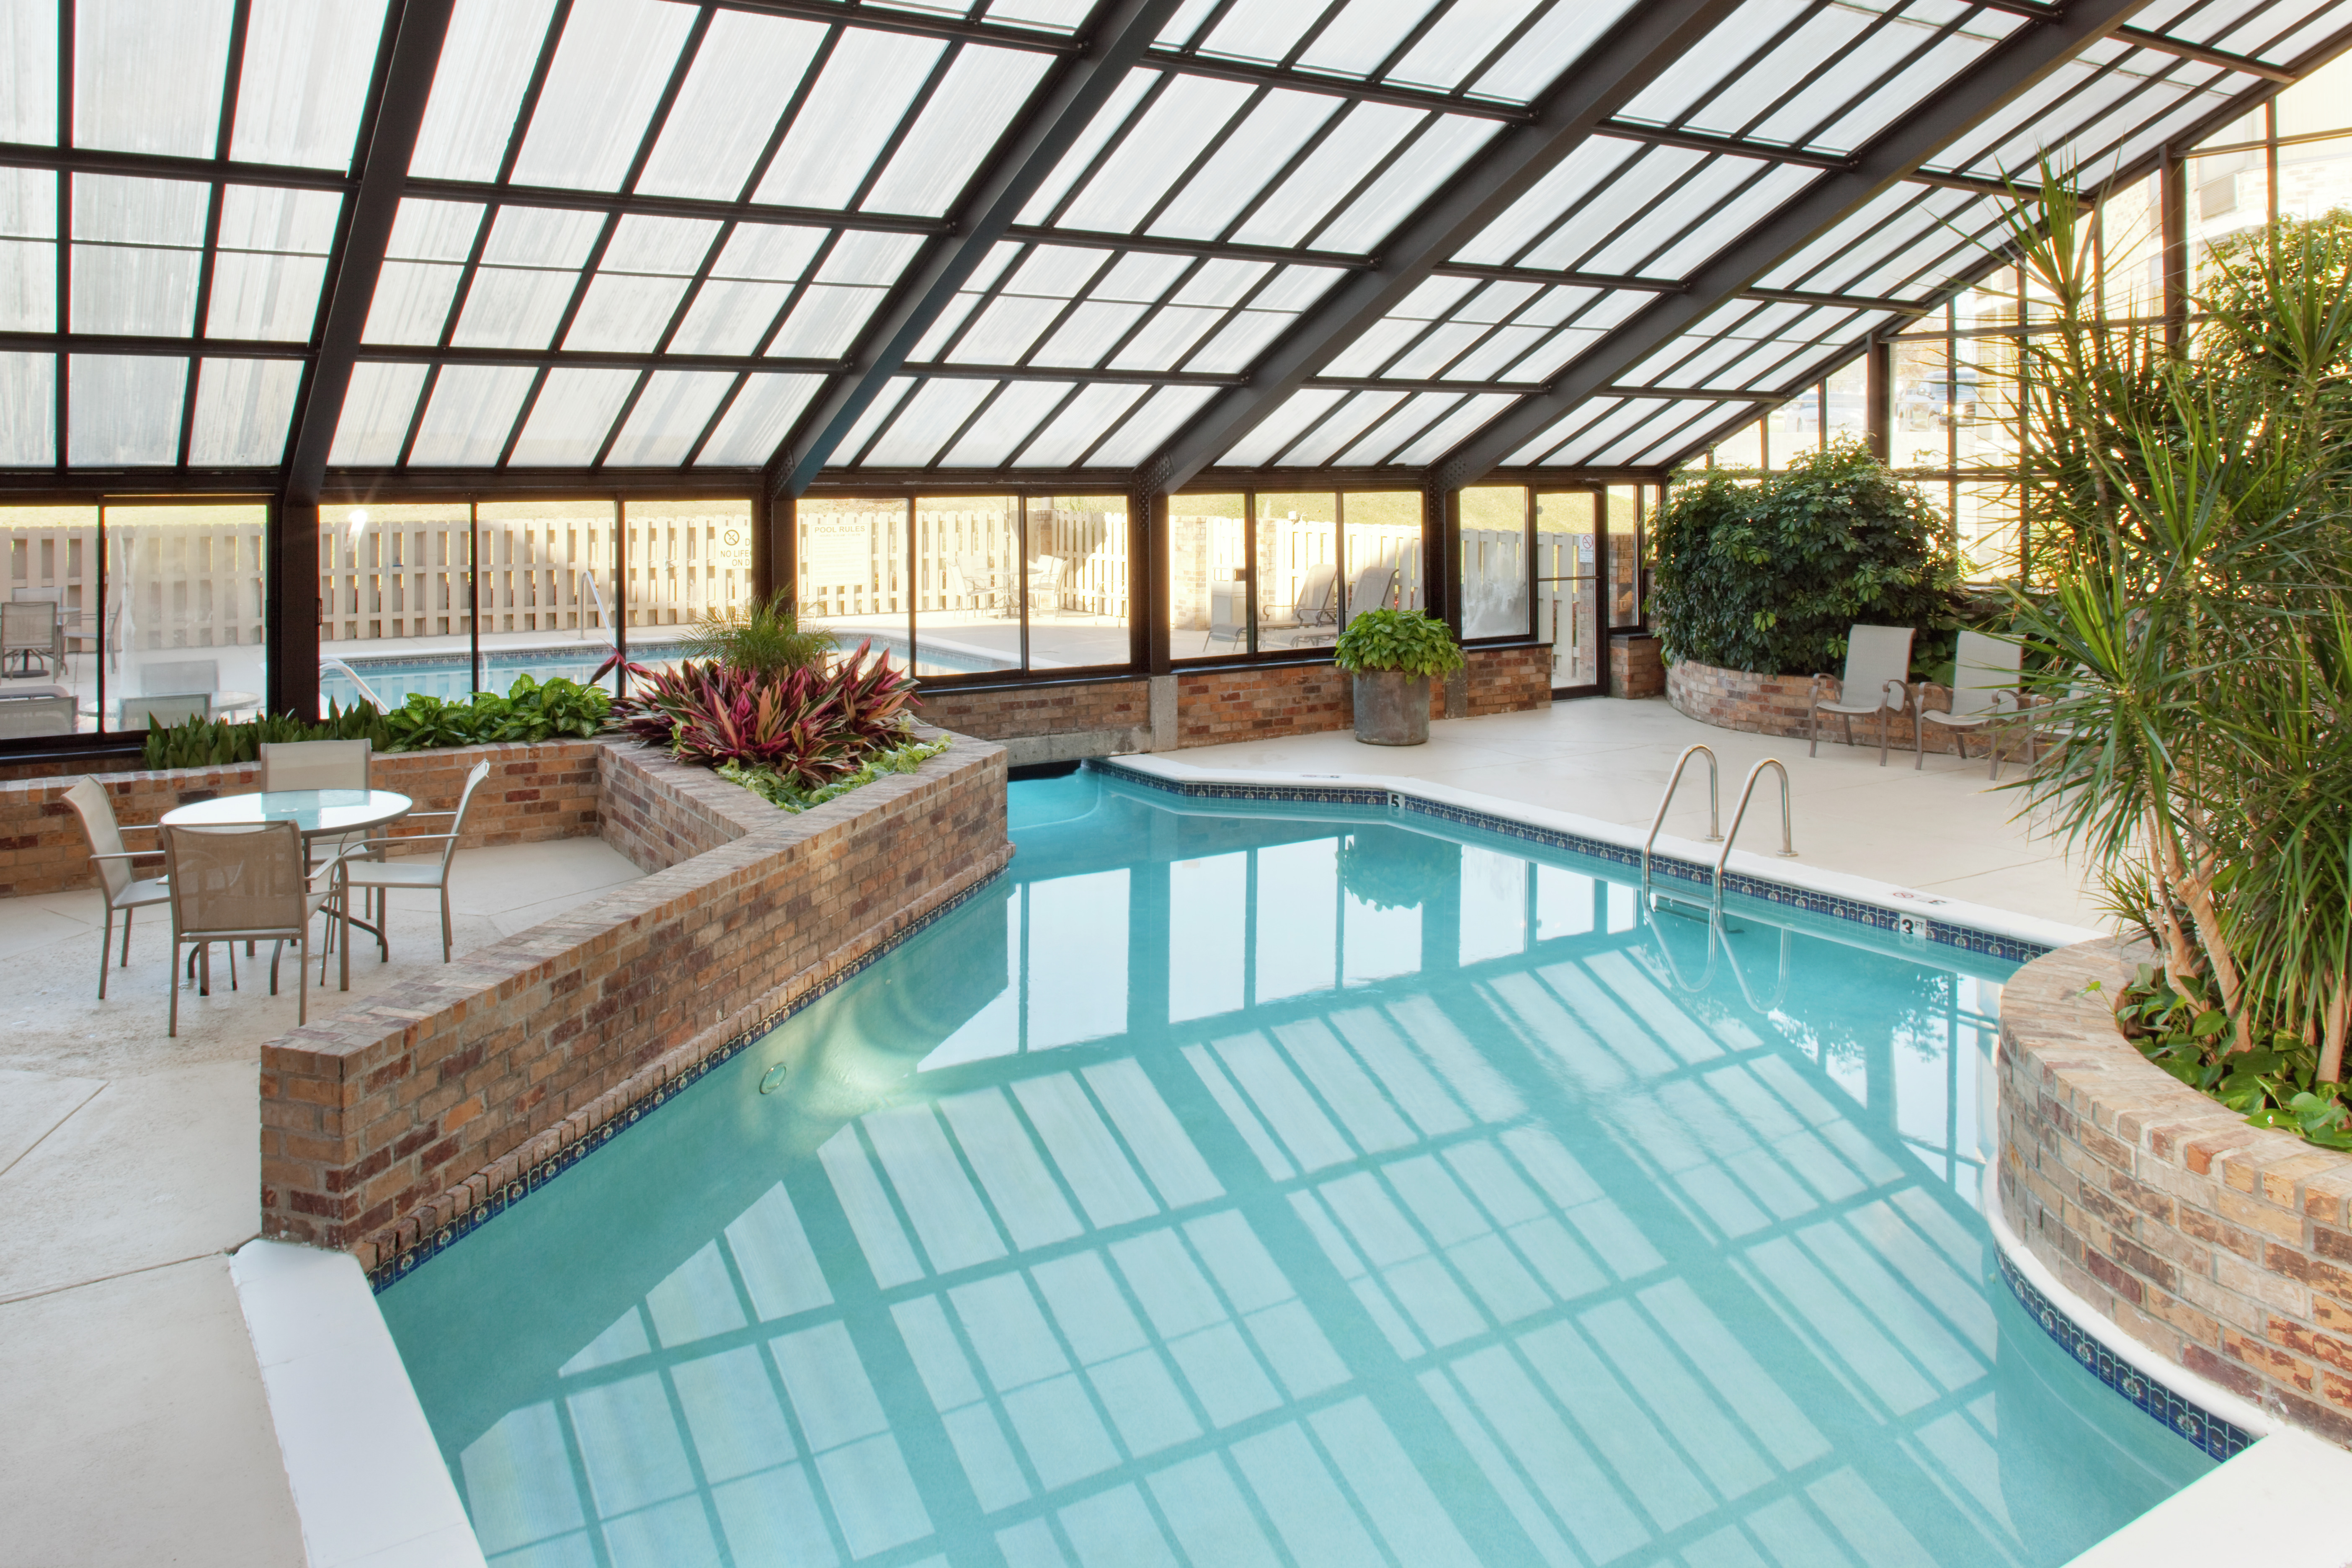 Tables, Chairs and Loungers by Indoor Pool With Windows and Skylight